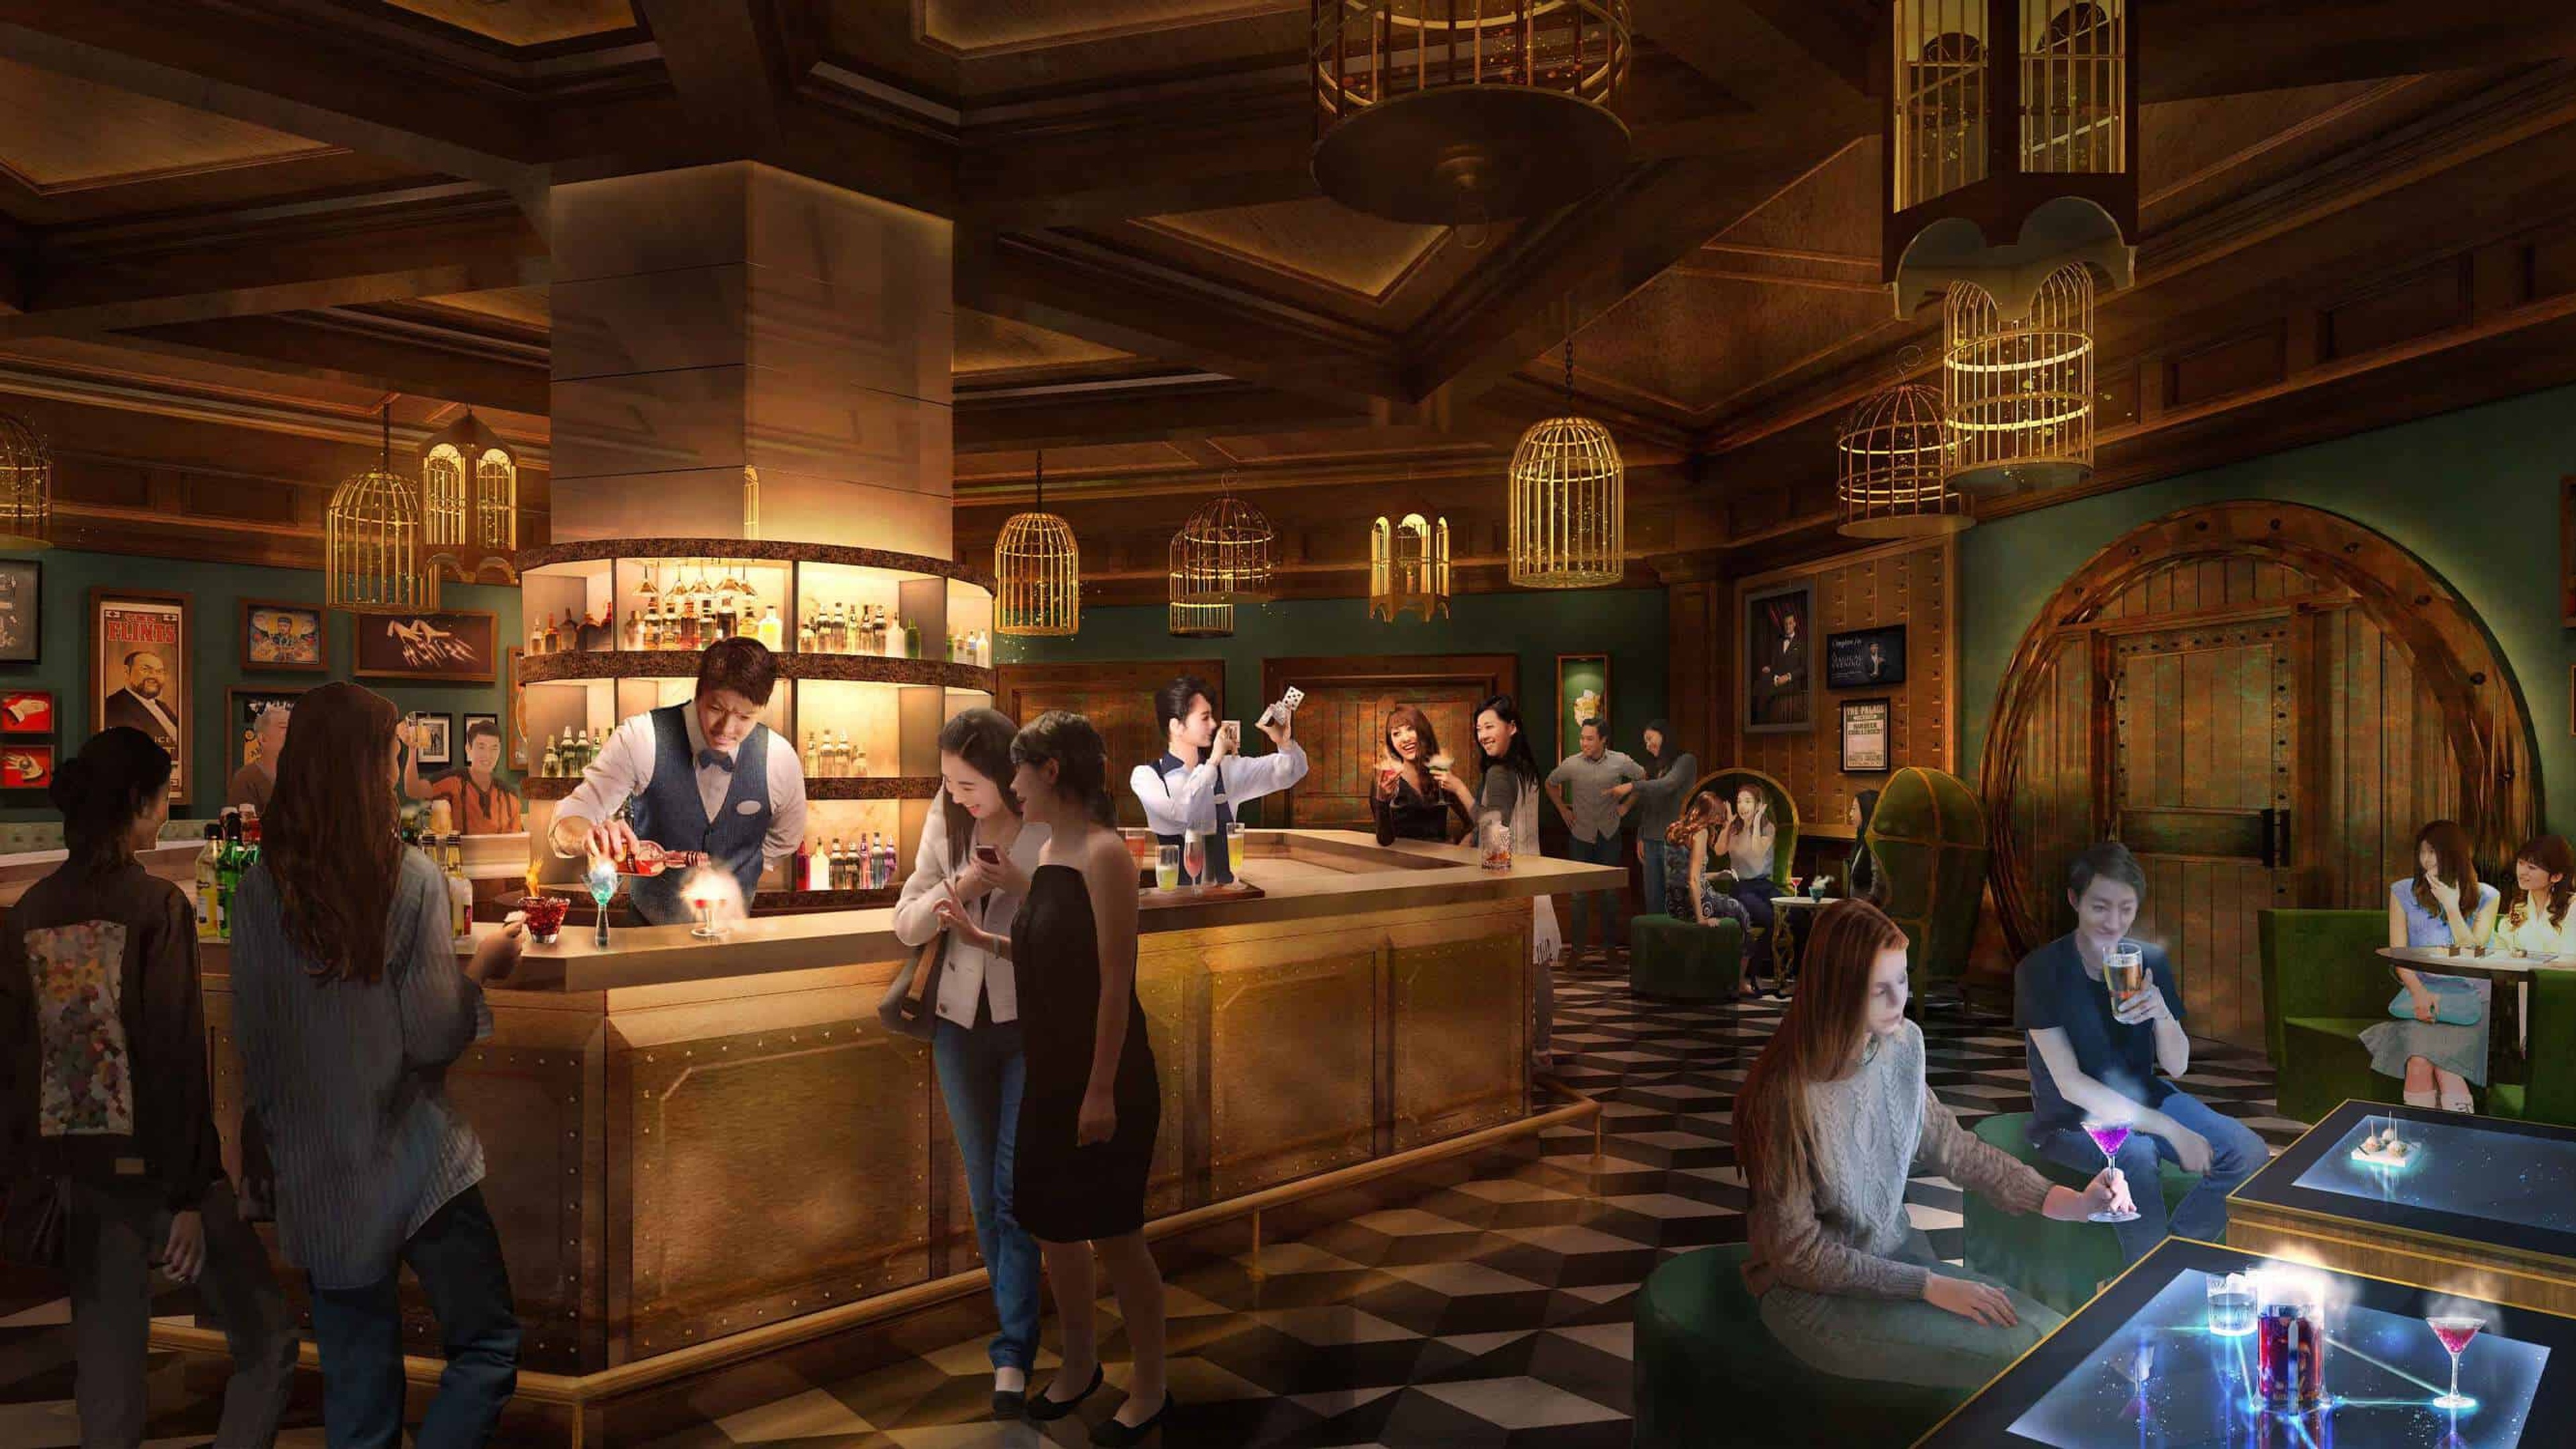 Render of a movie bar setting with people enjoying the environment and barman dressed in vintage attire